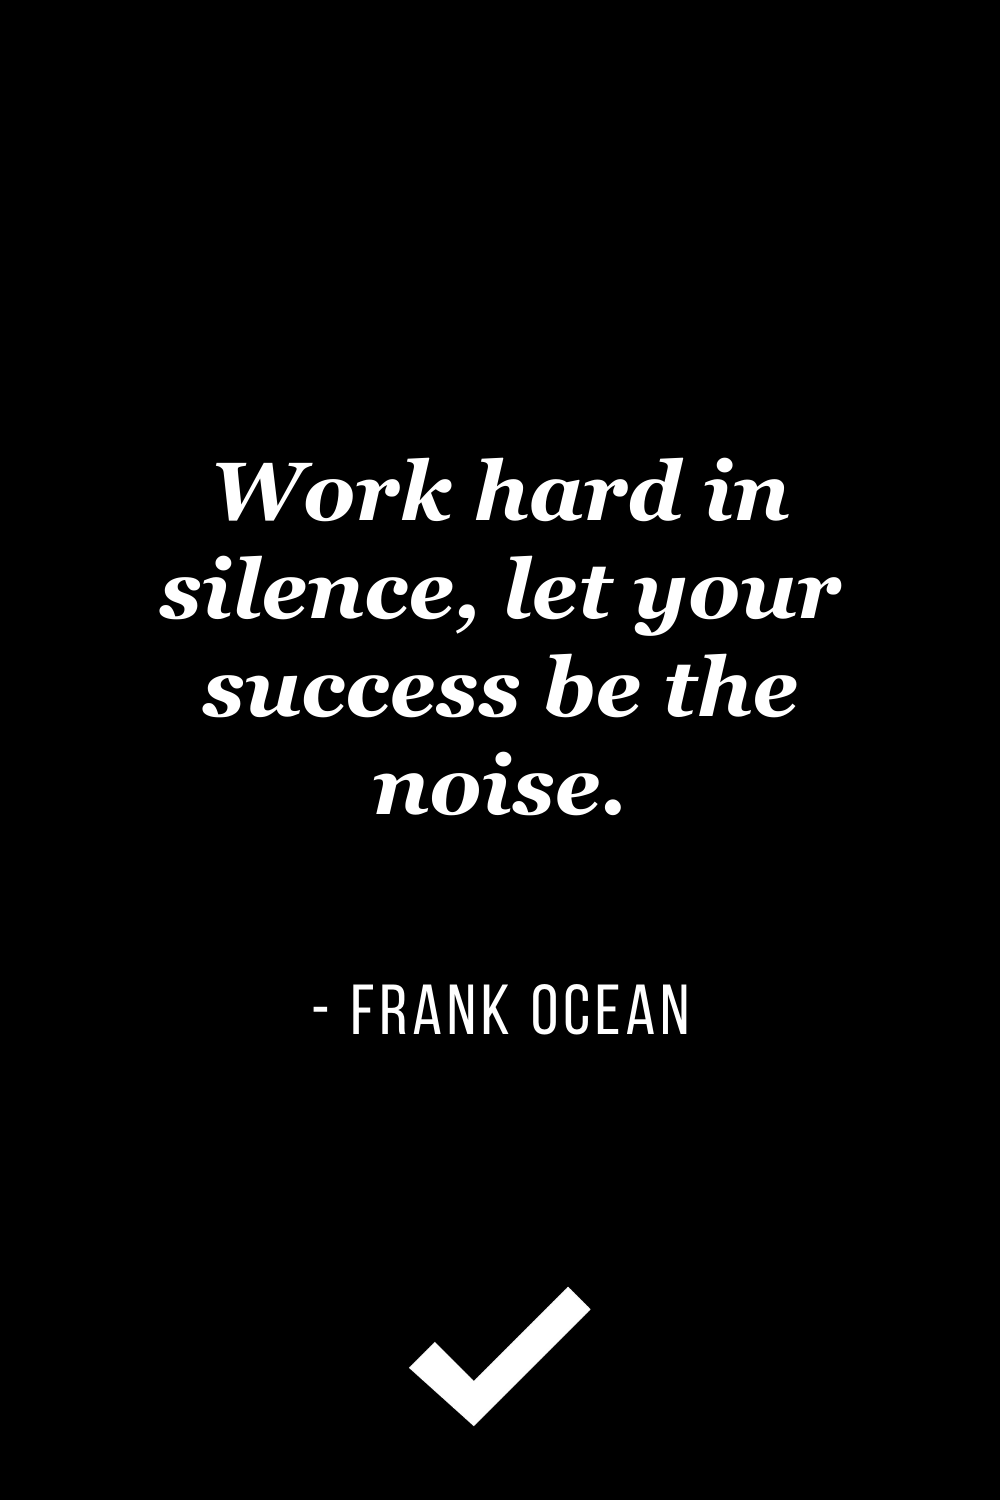 “Work hard in silence, let your success be the noise.” – Frank Ocean